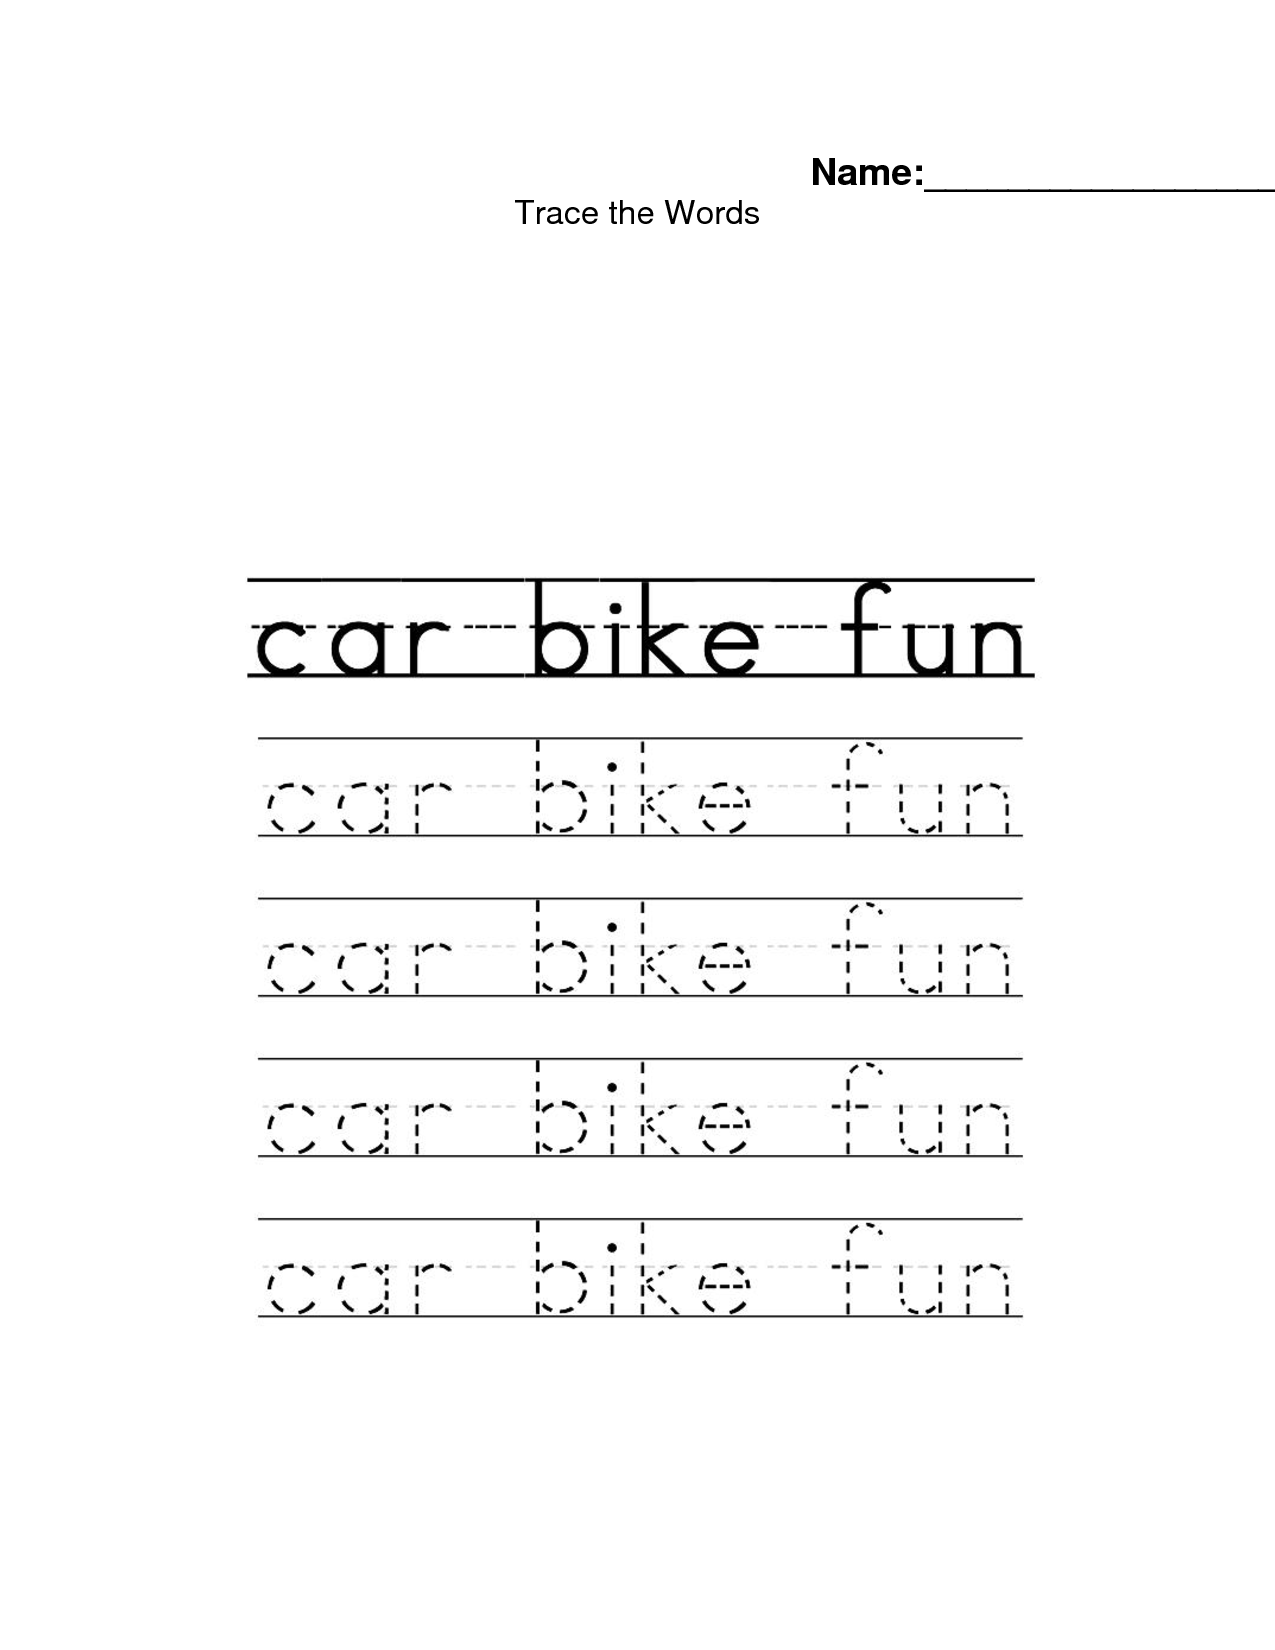 Tracing Words Worksheets Image